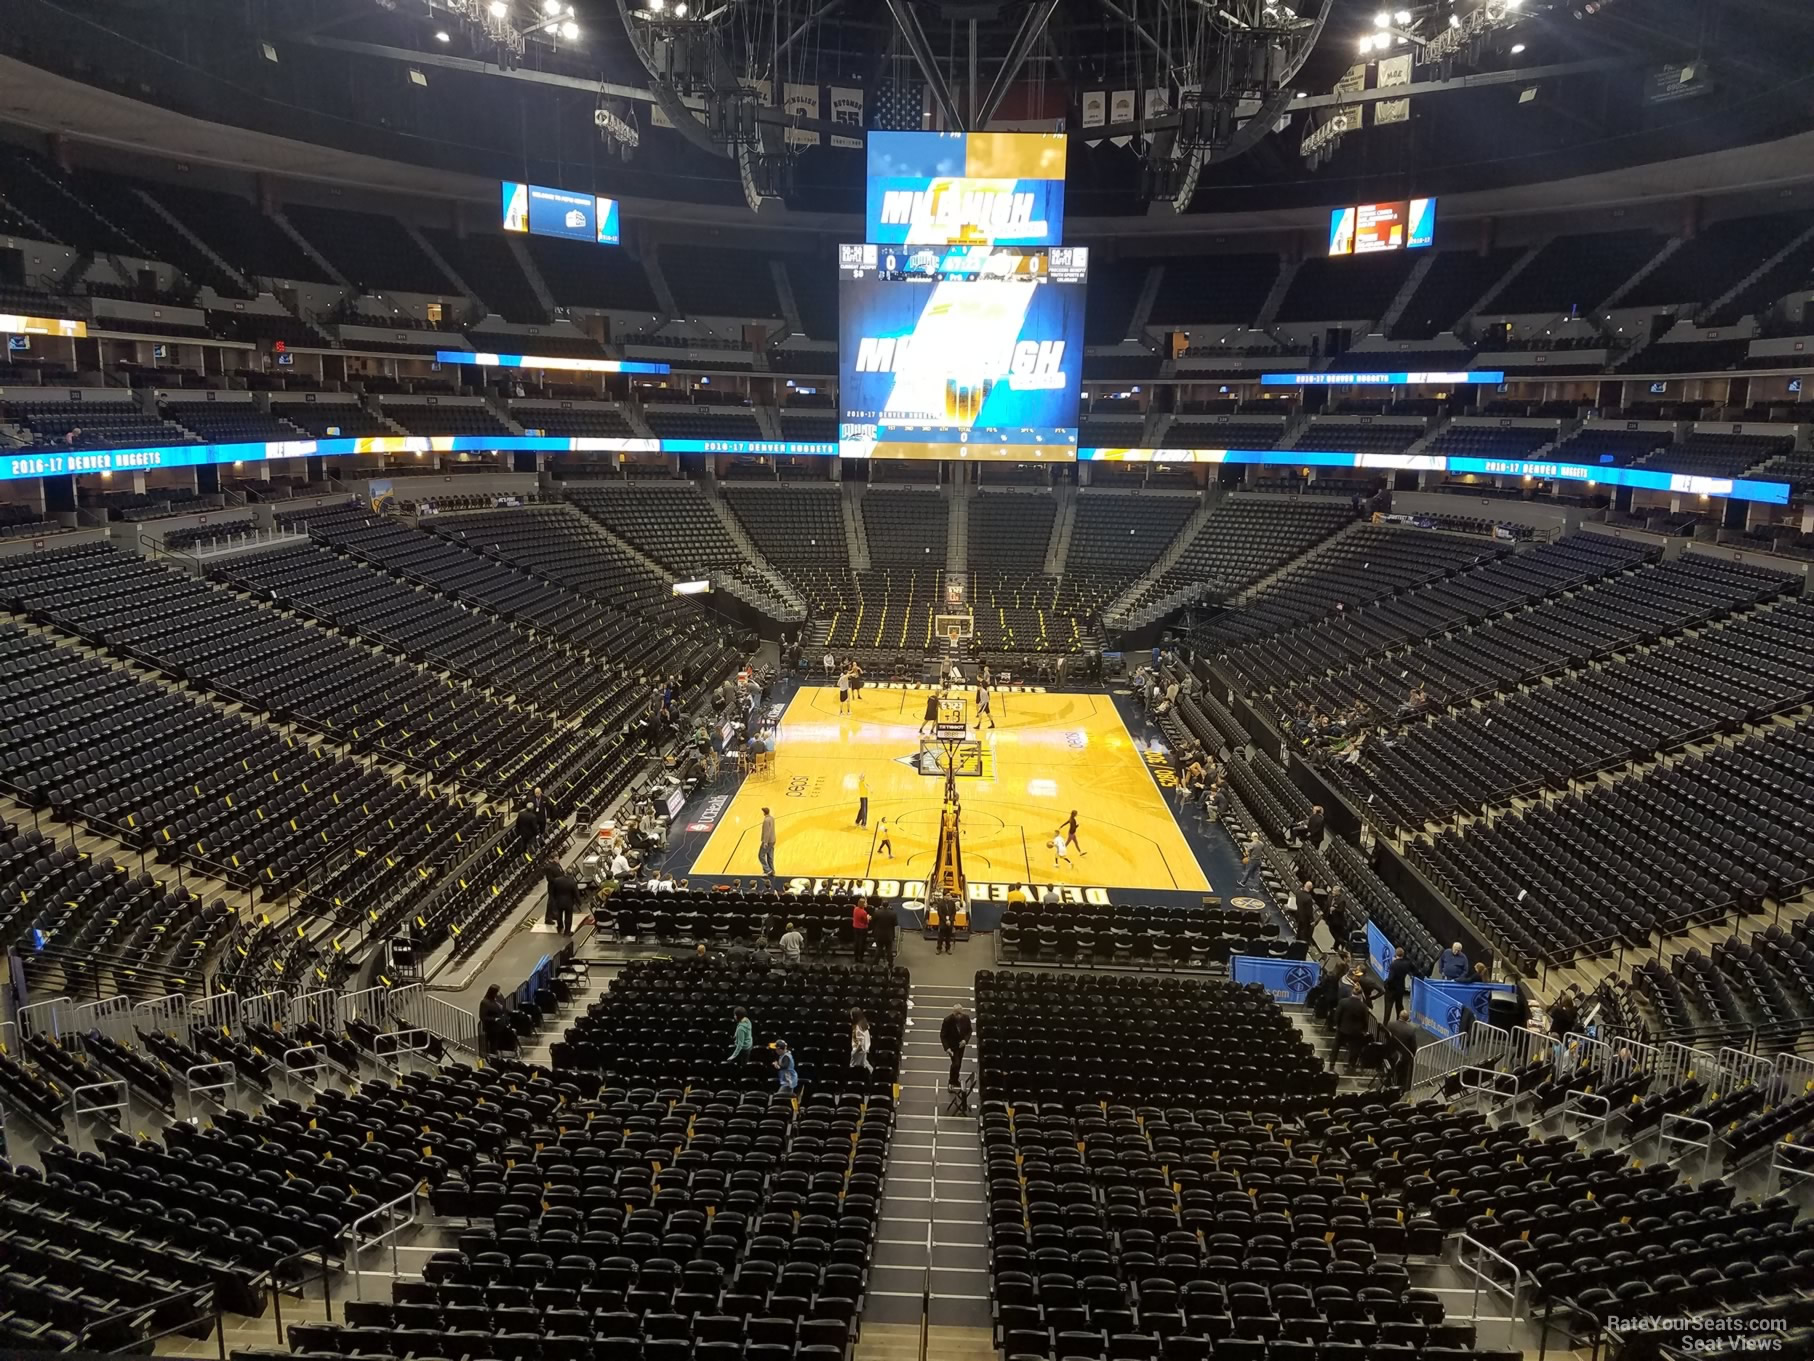 section 246, row 4 seat view  for basketball - ball arena